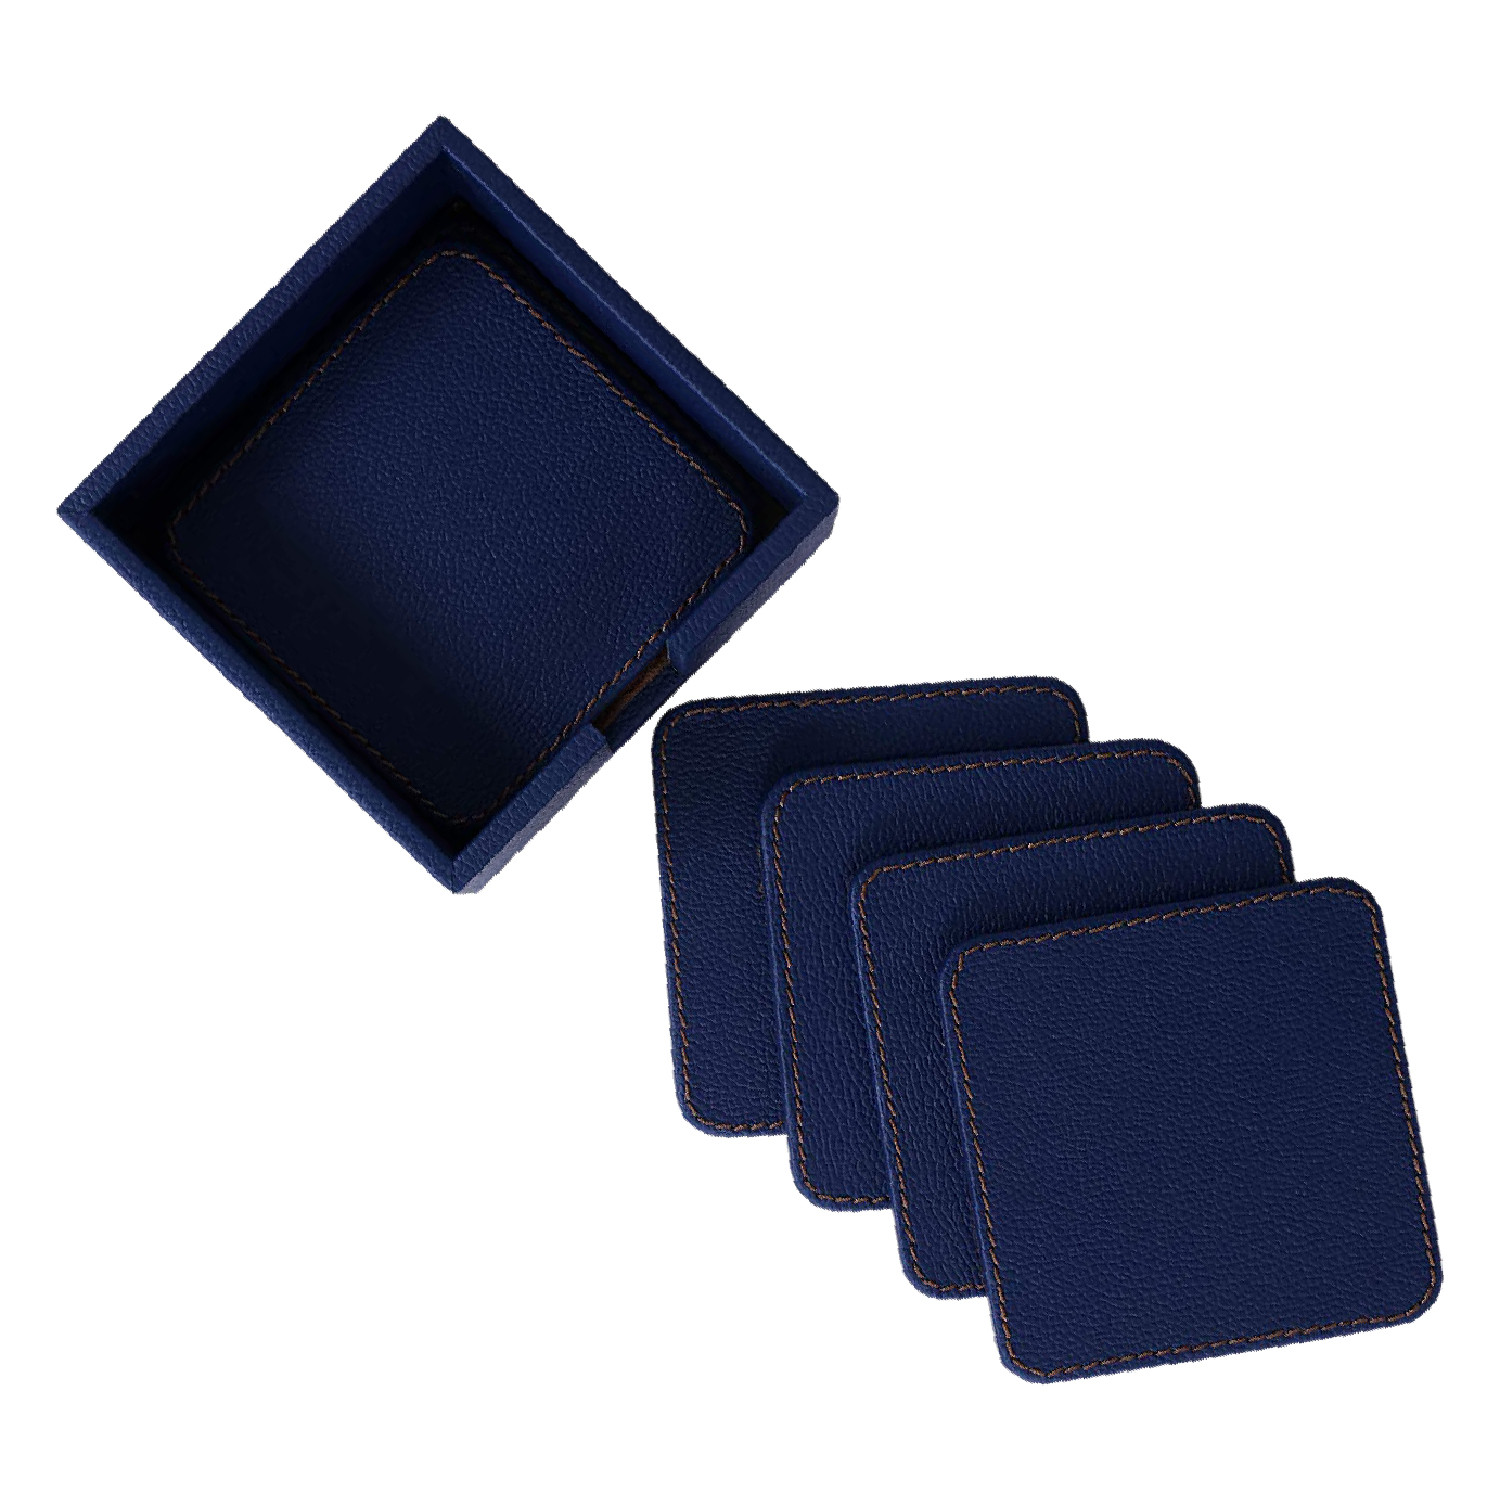 Kuber Industries Tea Coaster|Soft Leather Heat Insulation Tabletop Coasters|Decorative Holder for Tea, Coffee & Office Desk With Stand Set of 6 (Blue)